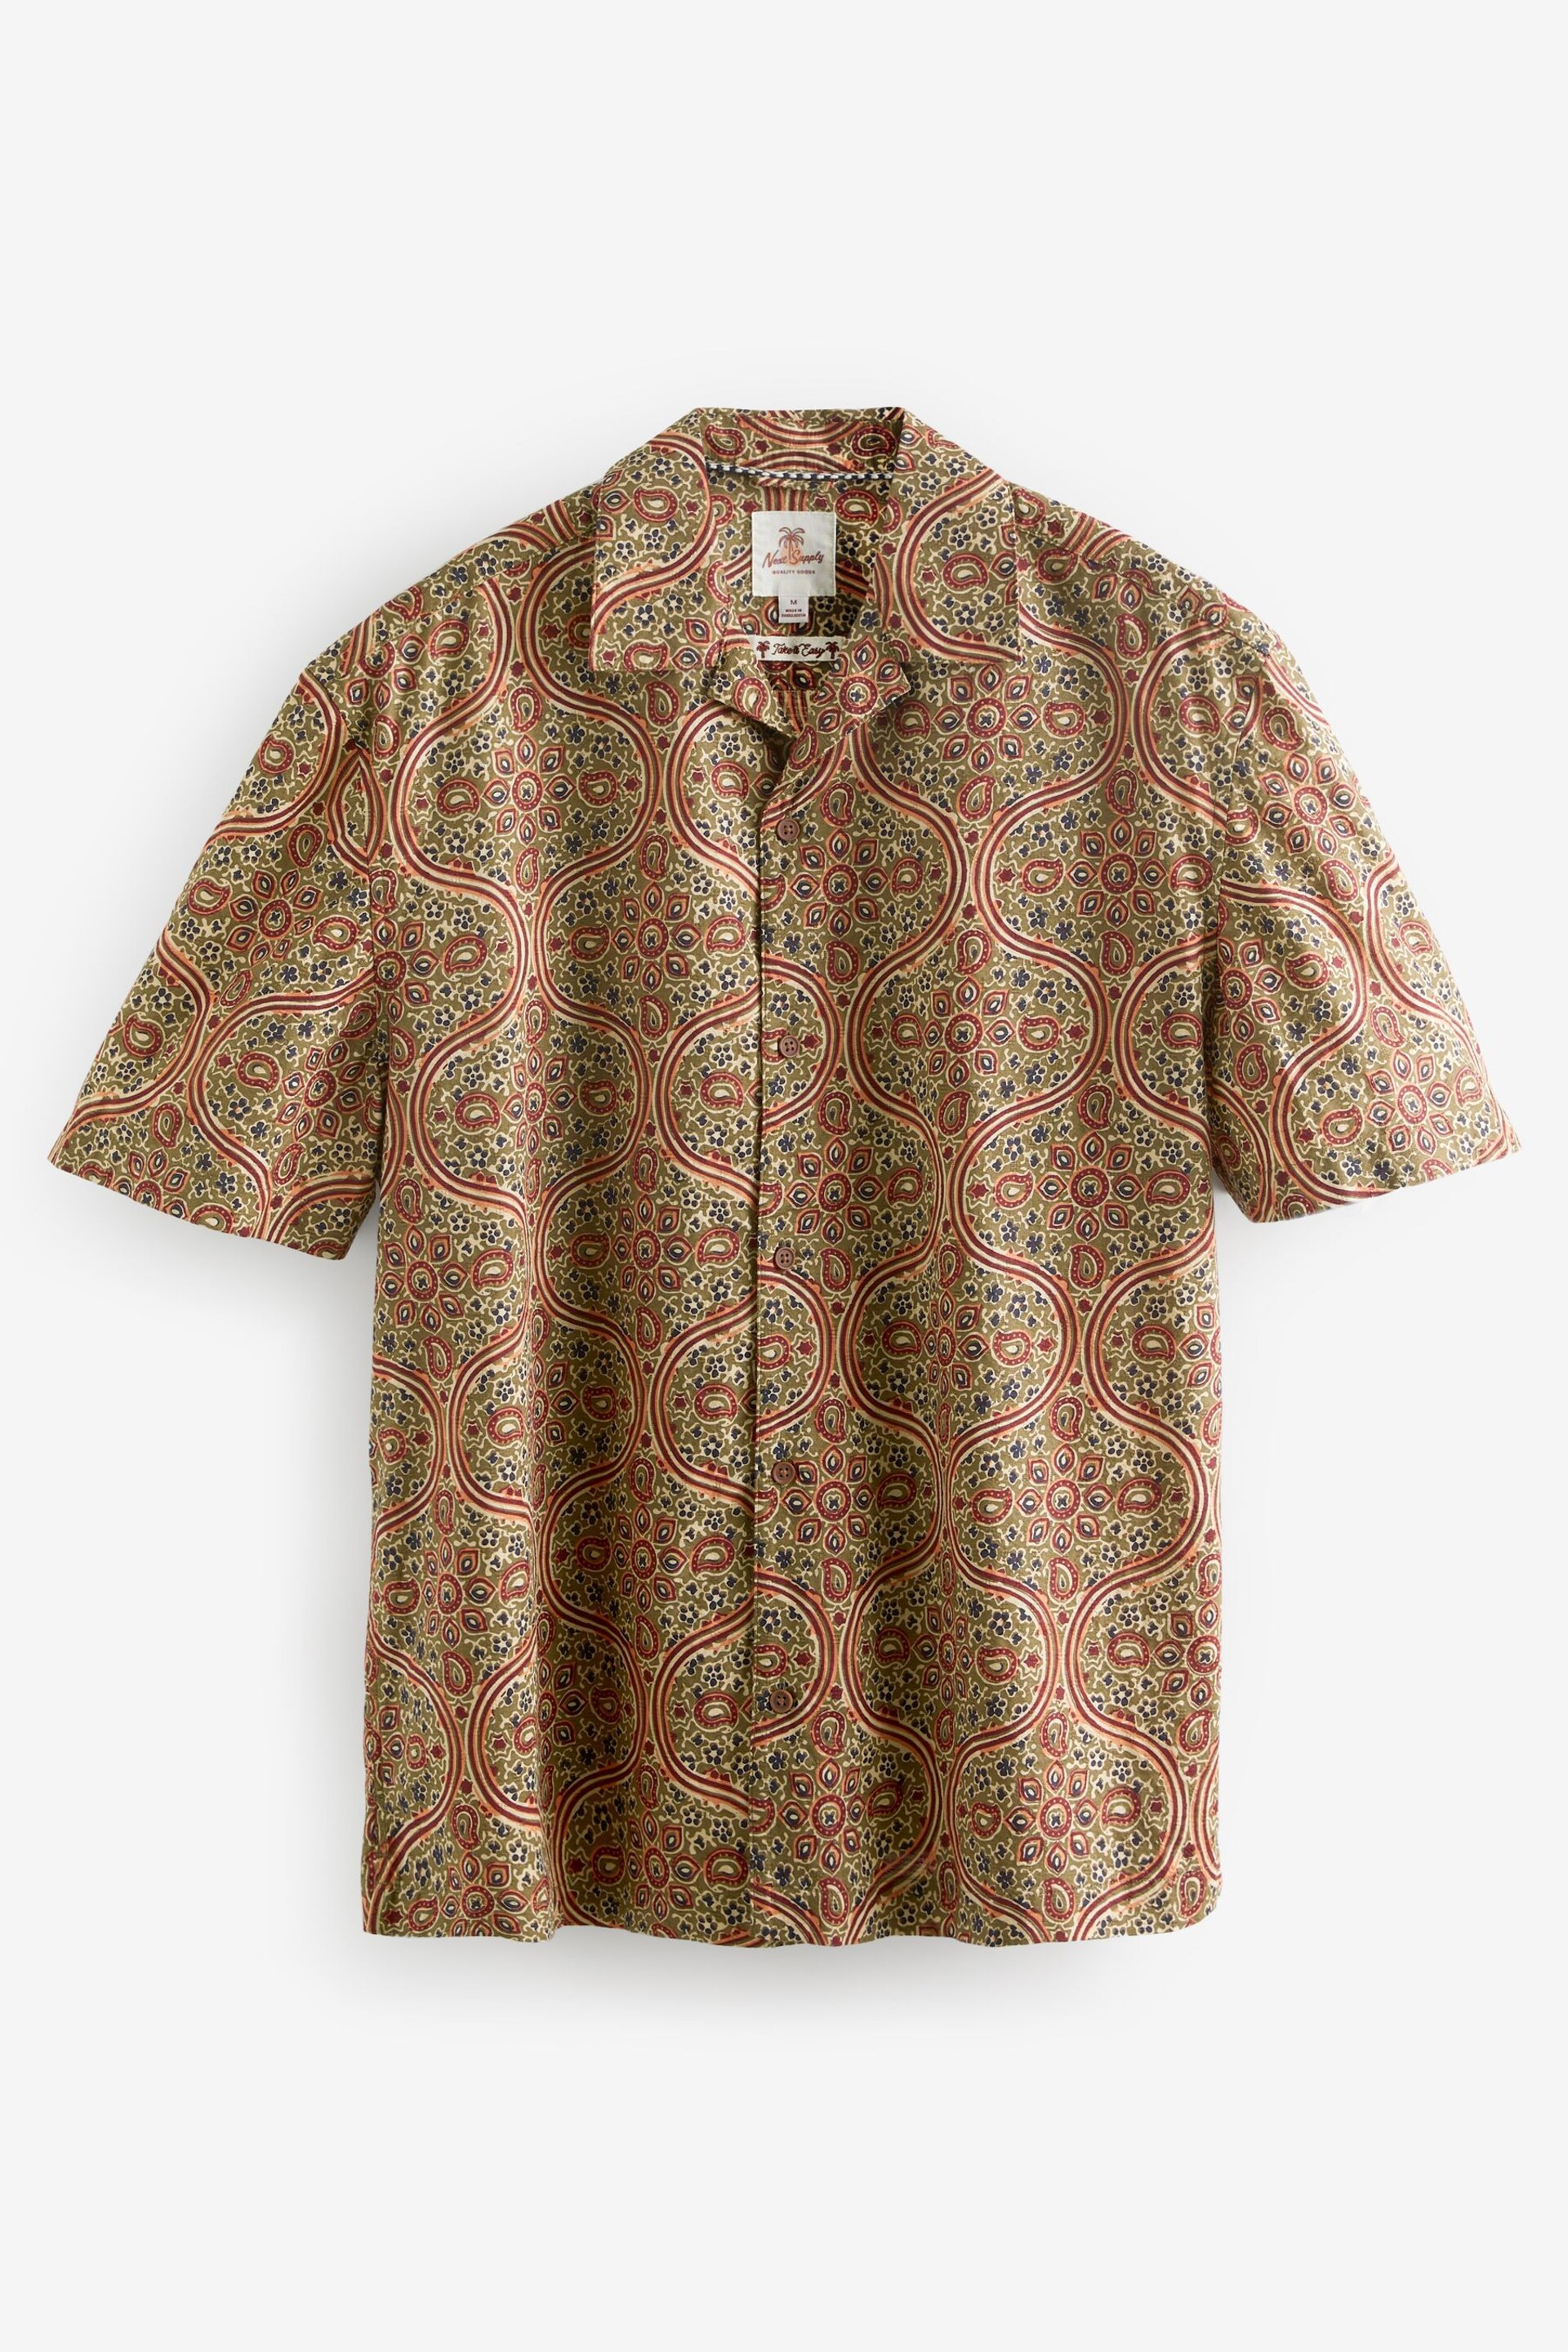 Multi Printed Short Sleeve Shirt With Cuban Collar - Image 5 of 7